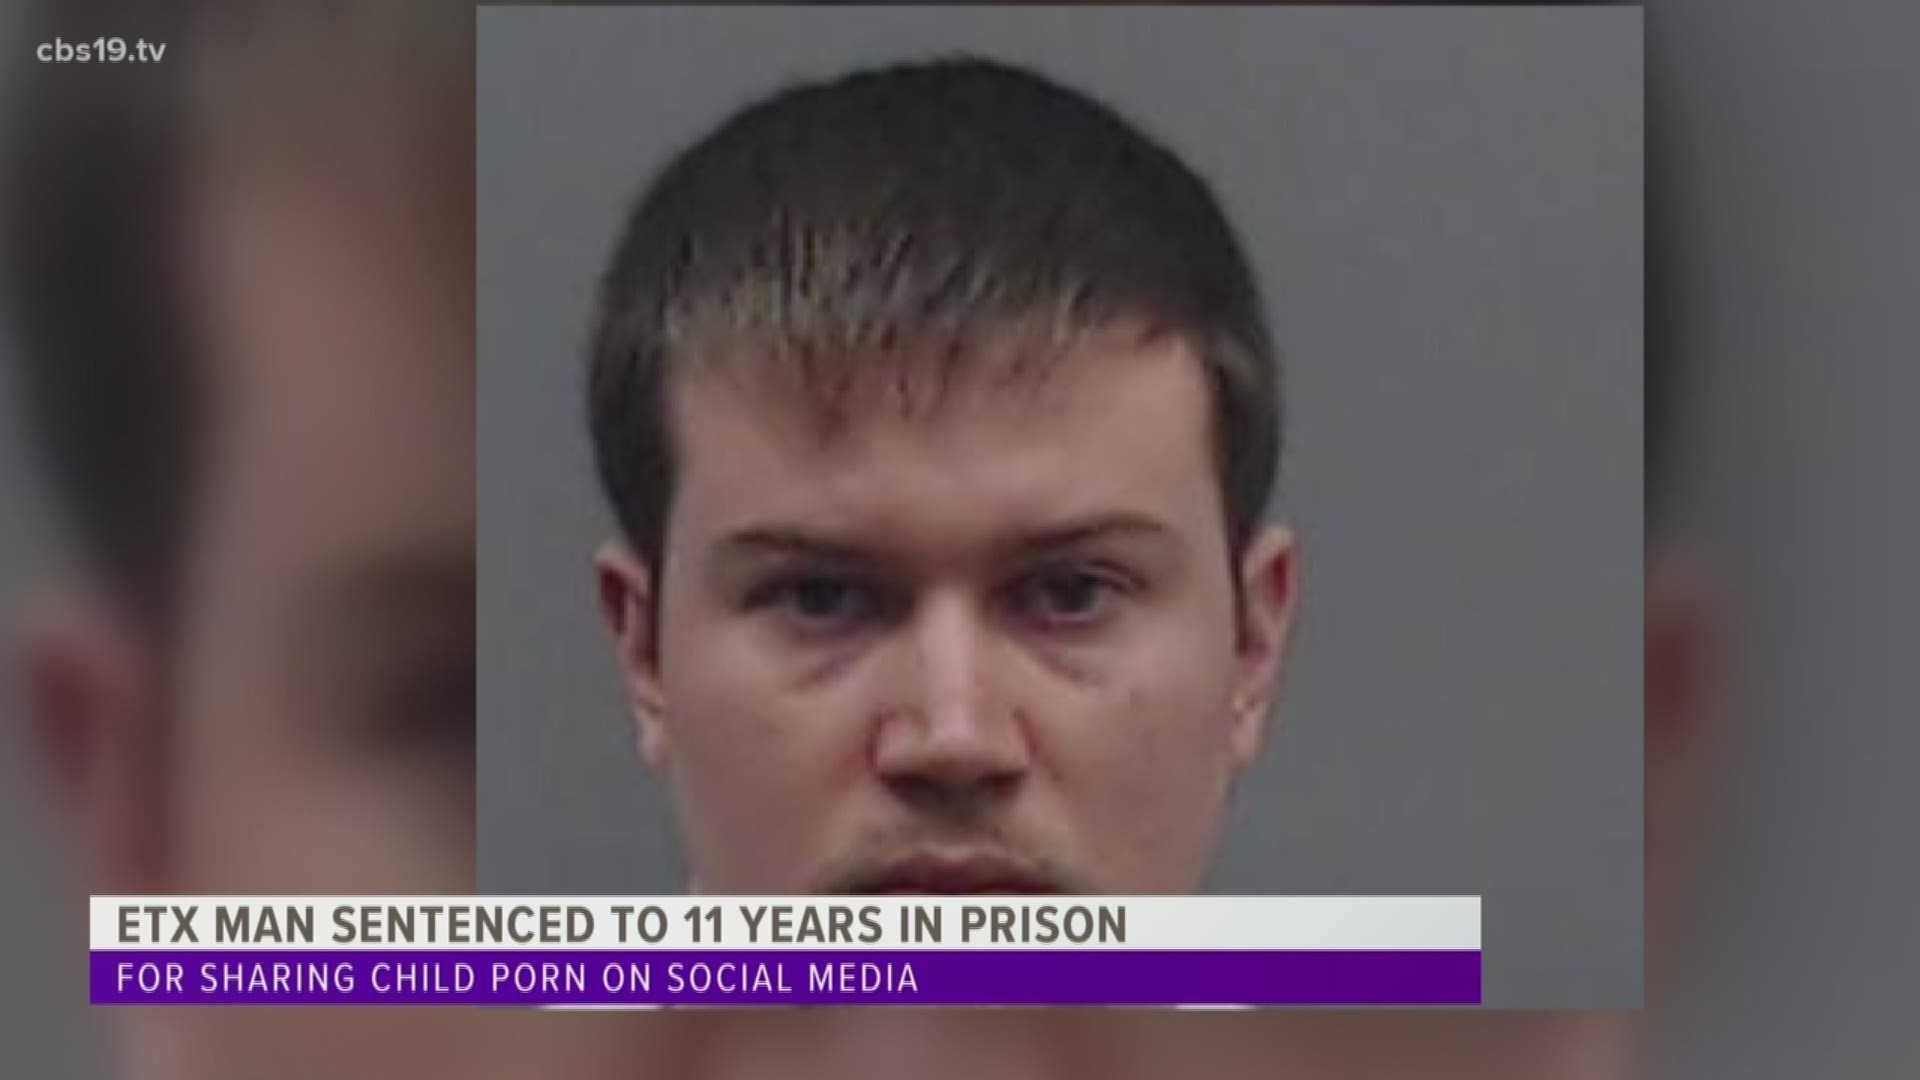 Matthew Kyle Landua was arrested Sept. 26, 2019 after officials found hundreds of inappropriate photos and videos with female children.